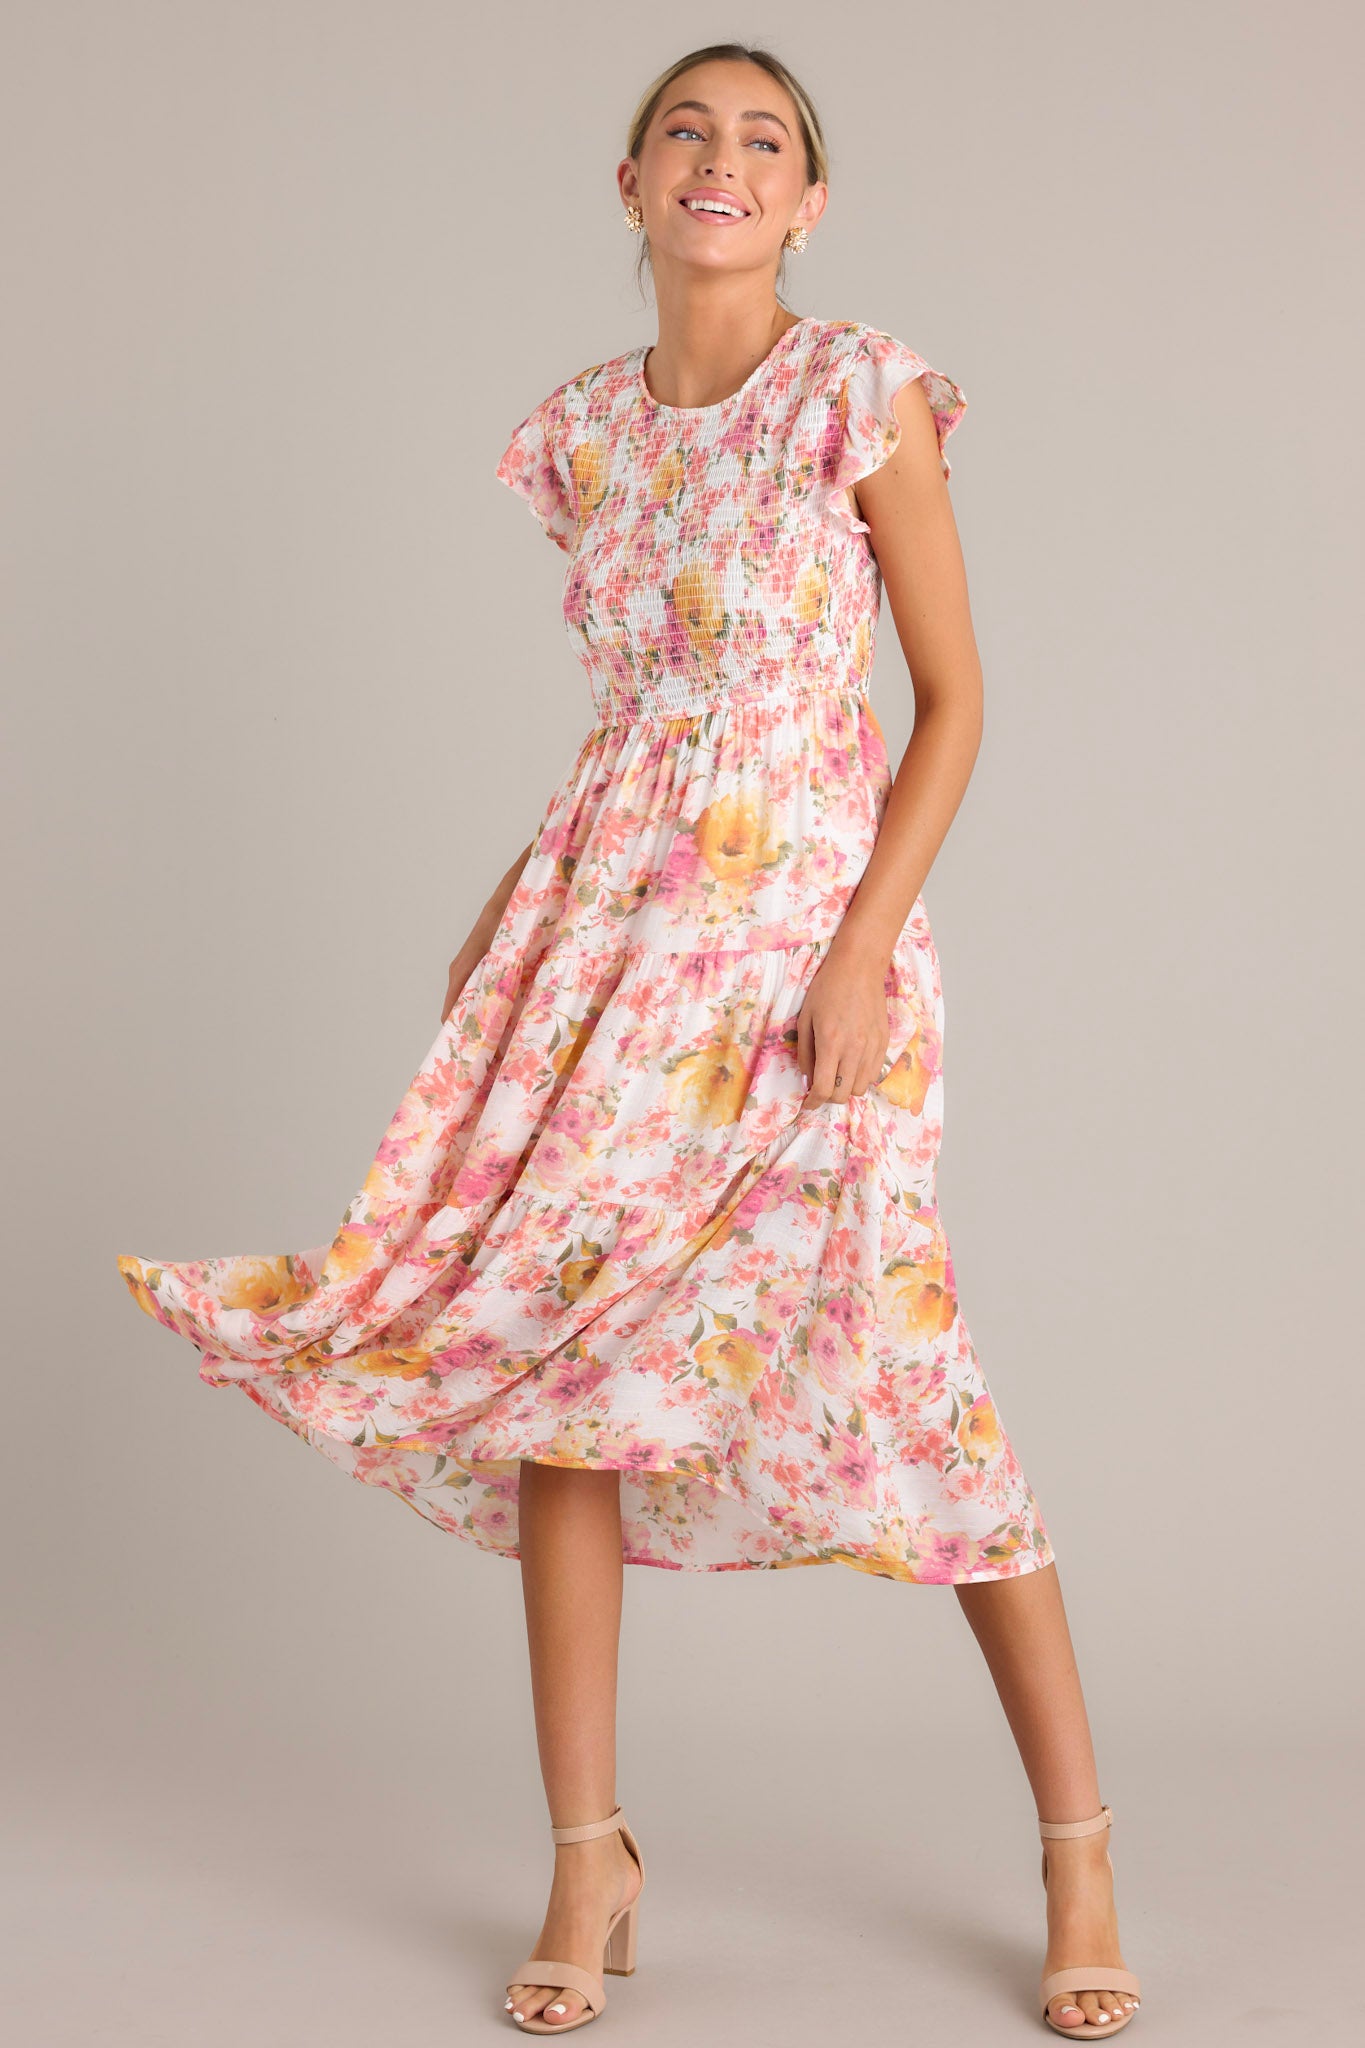 Pink floral midi dress with a high neckline, flutter sleeves, fully smocked bodice, tiered design, and vibrant floral pattern.